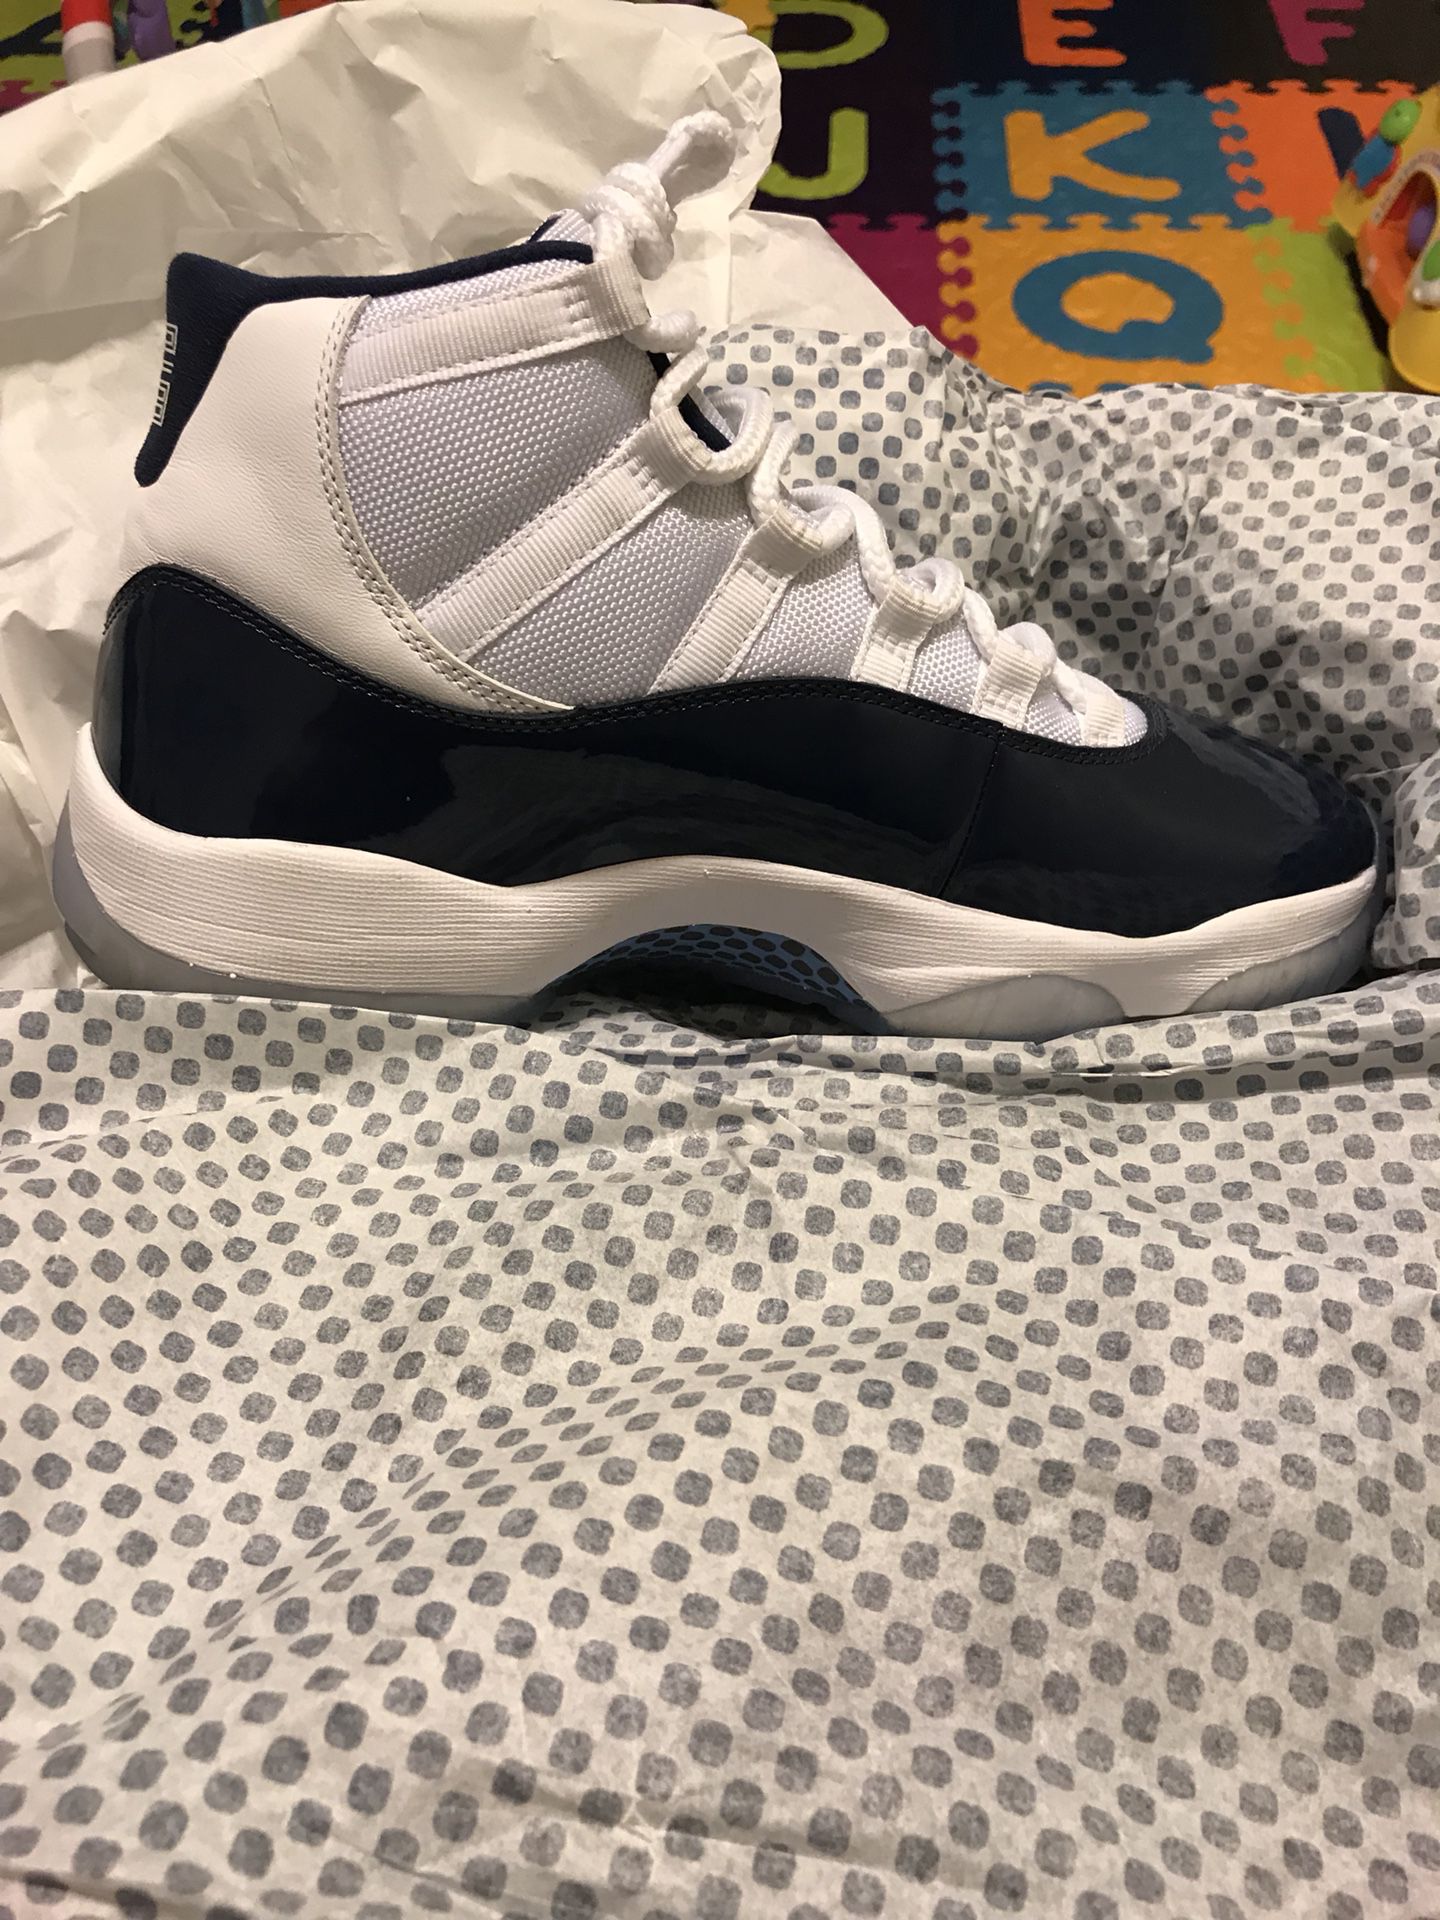 Nike air Jordan. Retro 11 white and blue size 9 price 220 or best ofert